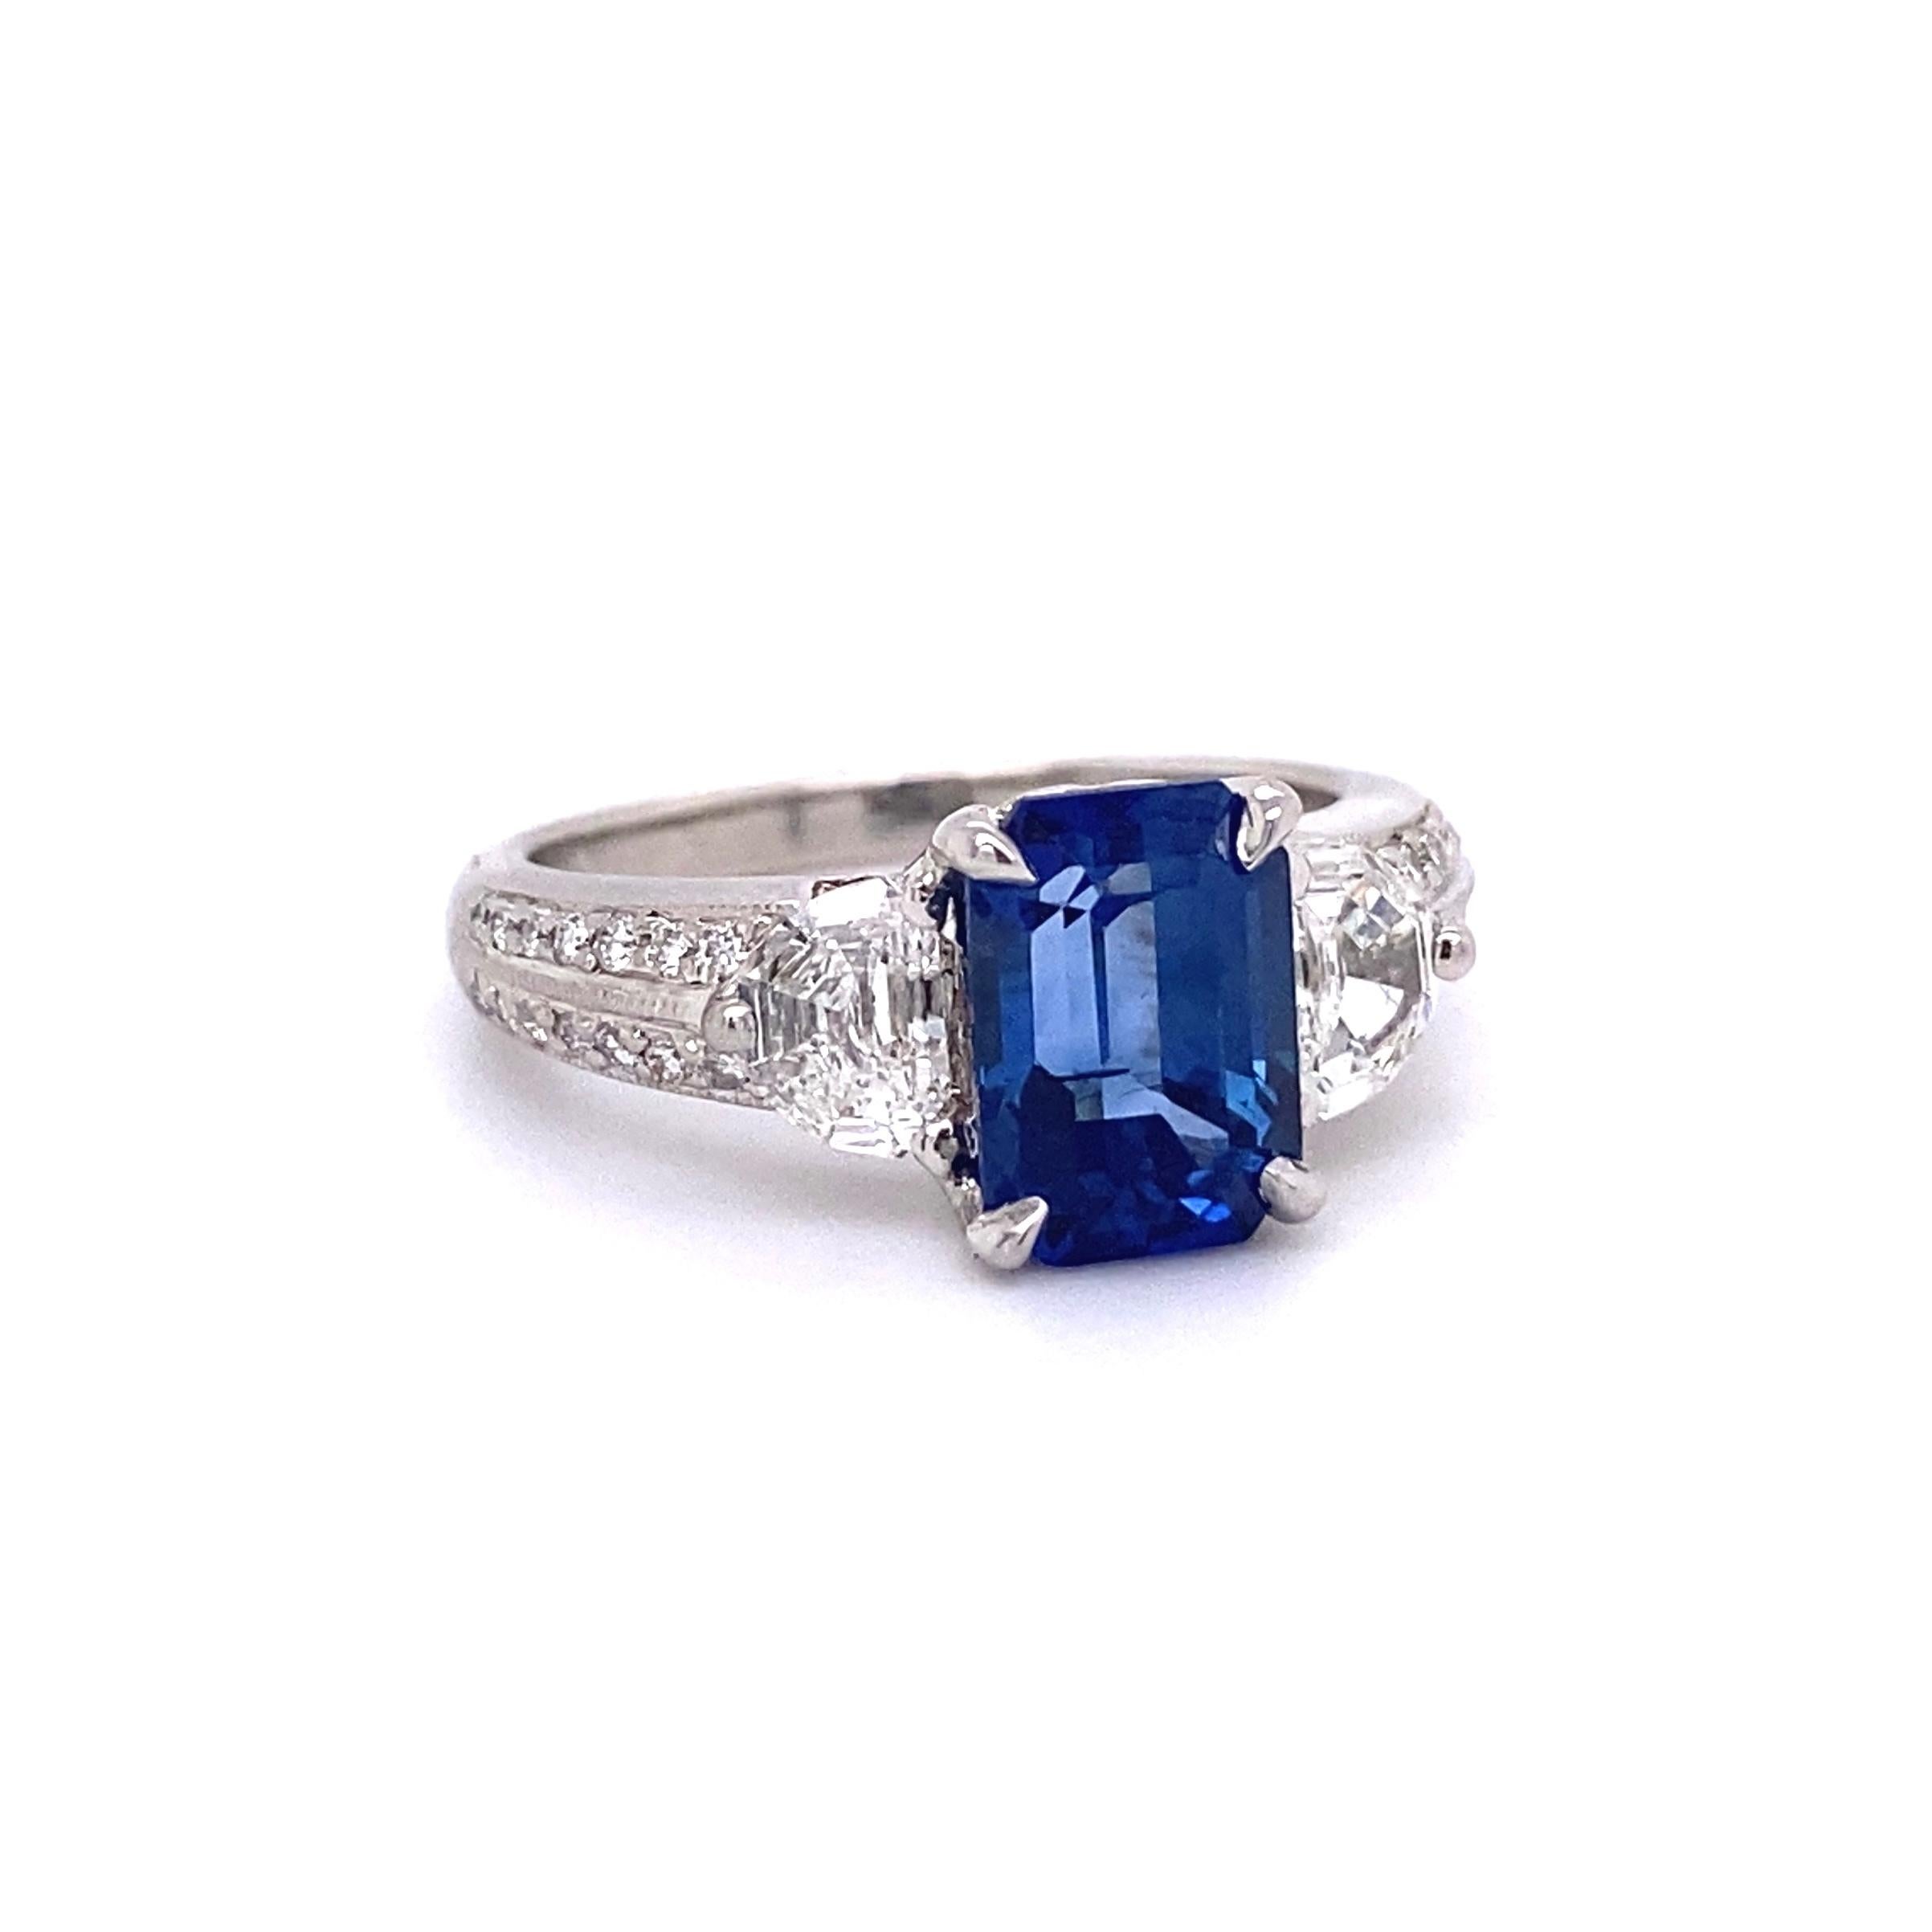 Beautiful finely detailed Platinum 3 Stone Blue Sapphire and Diamond Ring. Securely Hand set with a 3.00 Carat Emerald-cut Blue Sapphire and 2 Diamonds approx. 0.94tctw. The Sapphire is a Beautiful Royal Blue Color and eye clean. The diamonds are F